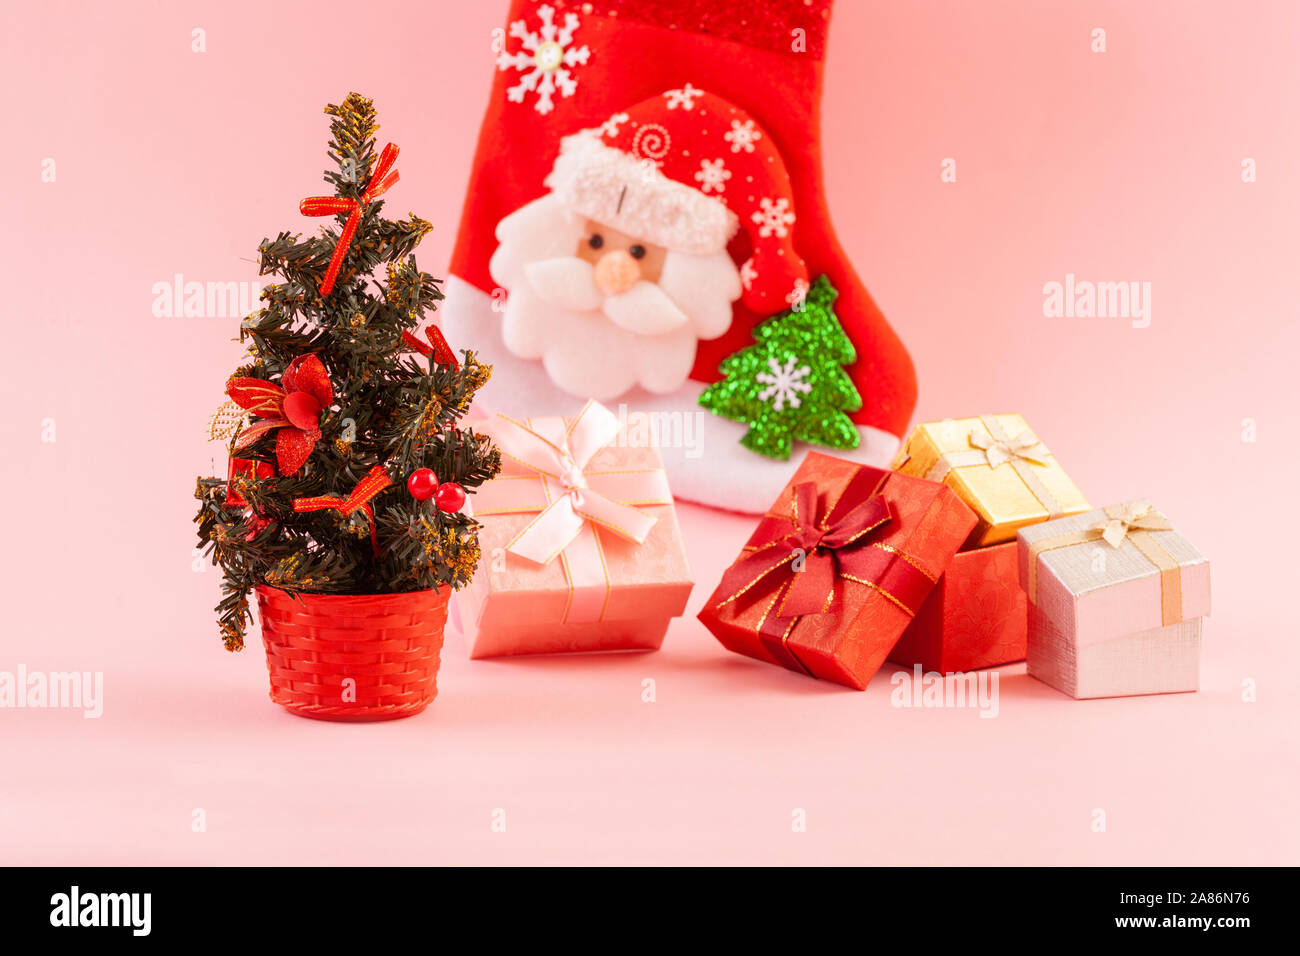 Christmas concept. Decorated Christmas tree with four gift boxes on a pink background. Gift sock in the background. Stock Photo